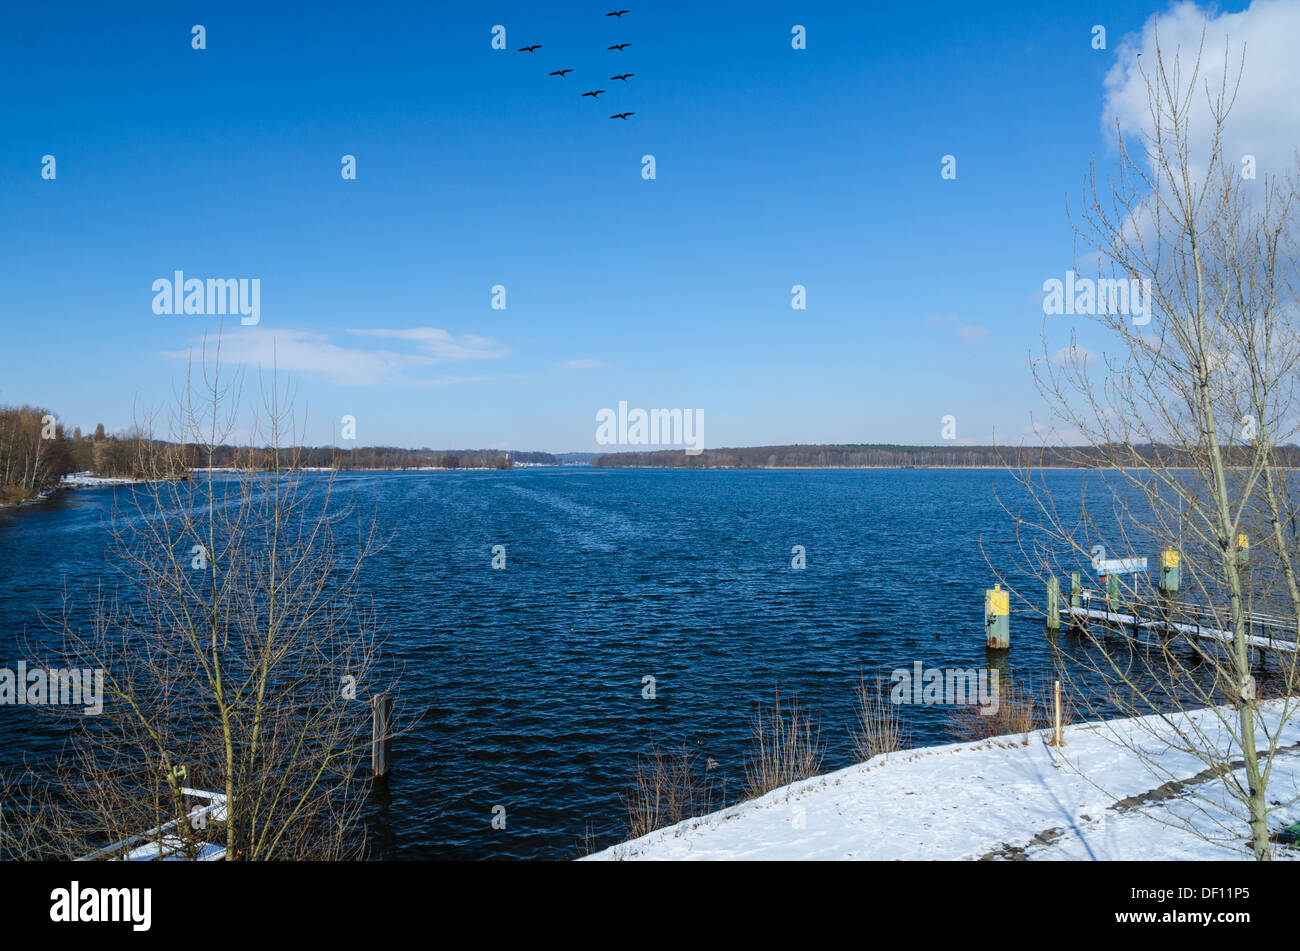 Flying birds over winter lake or river water surface and snowy shore with pier Stock Photo